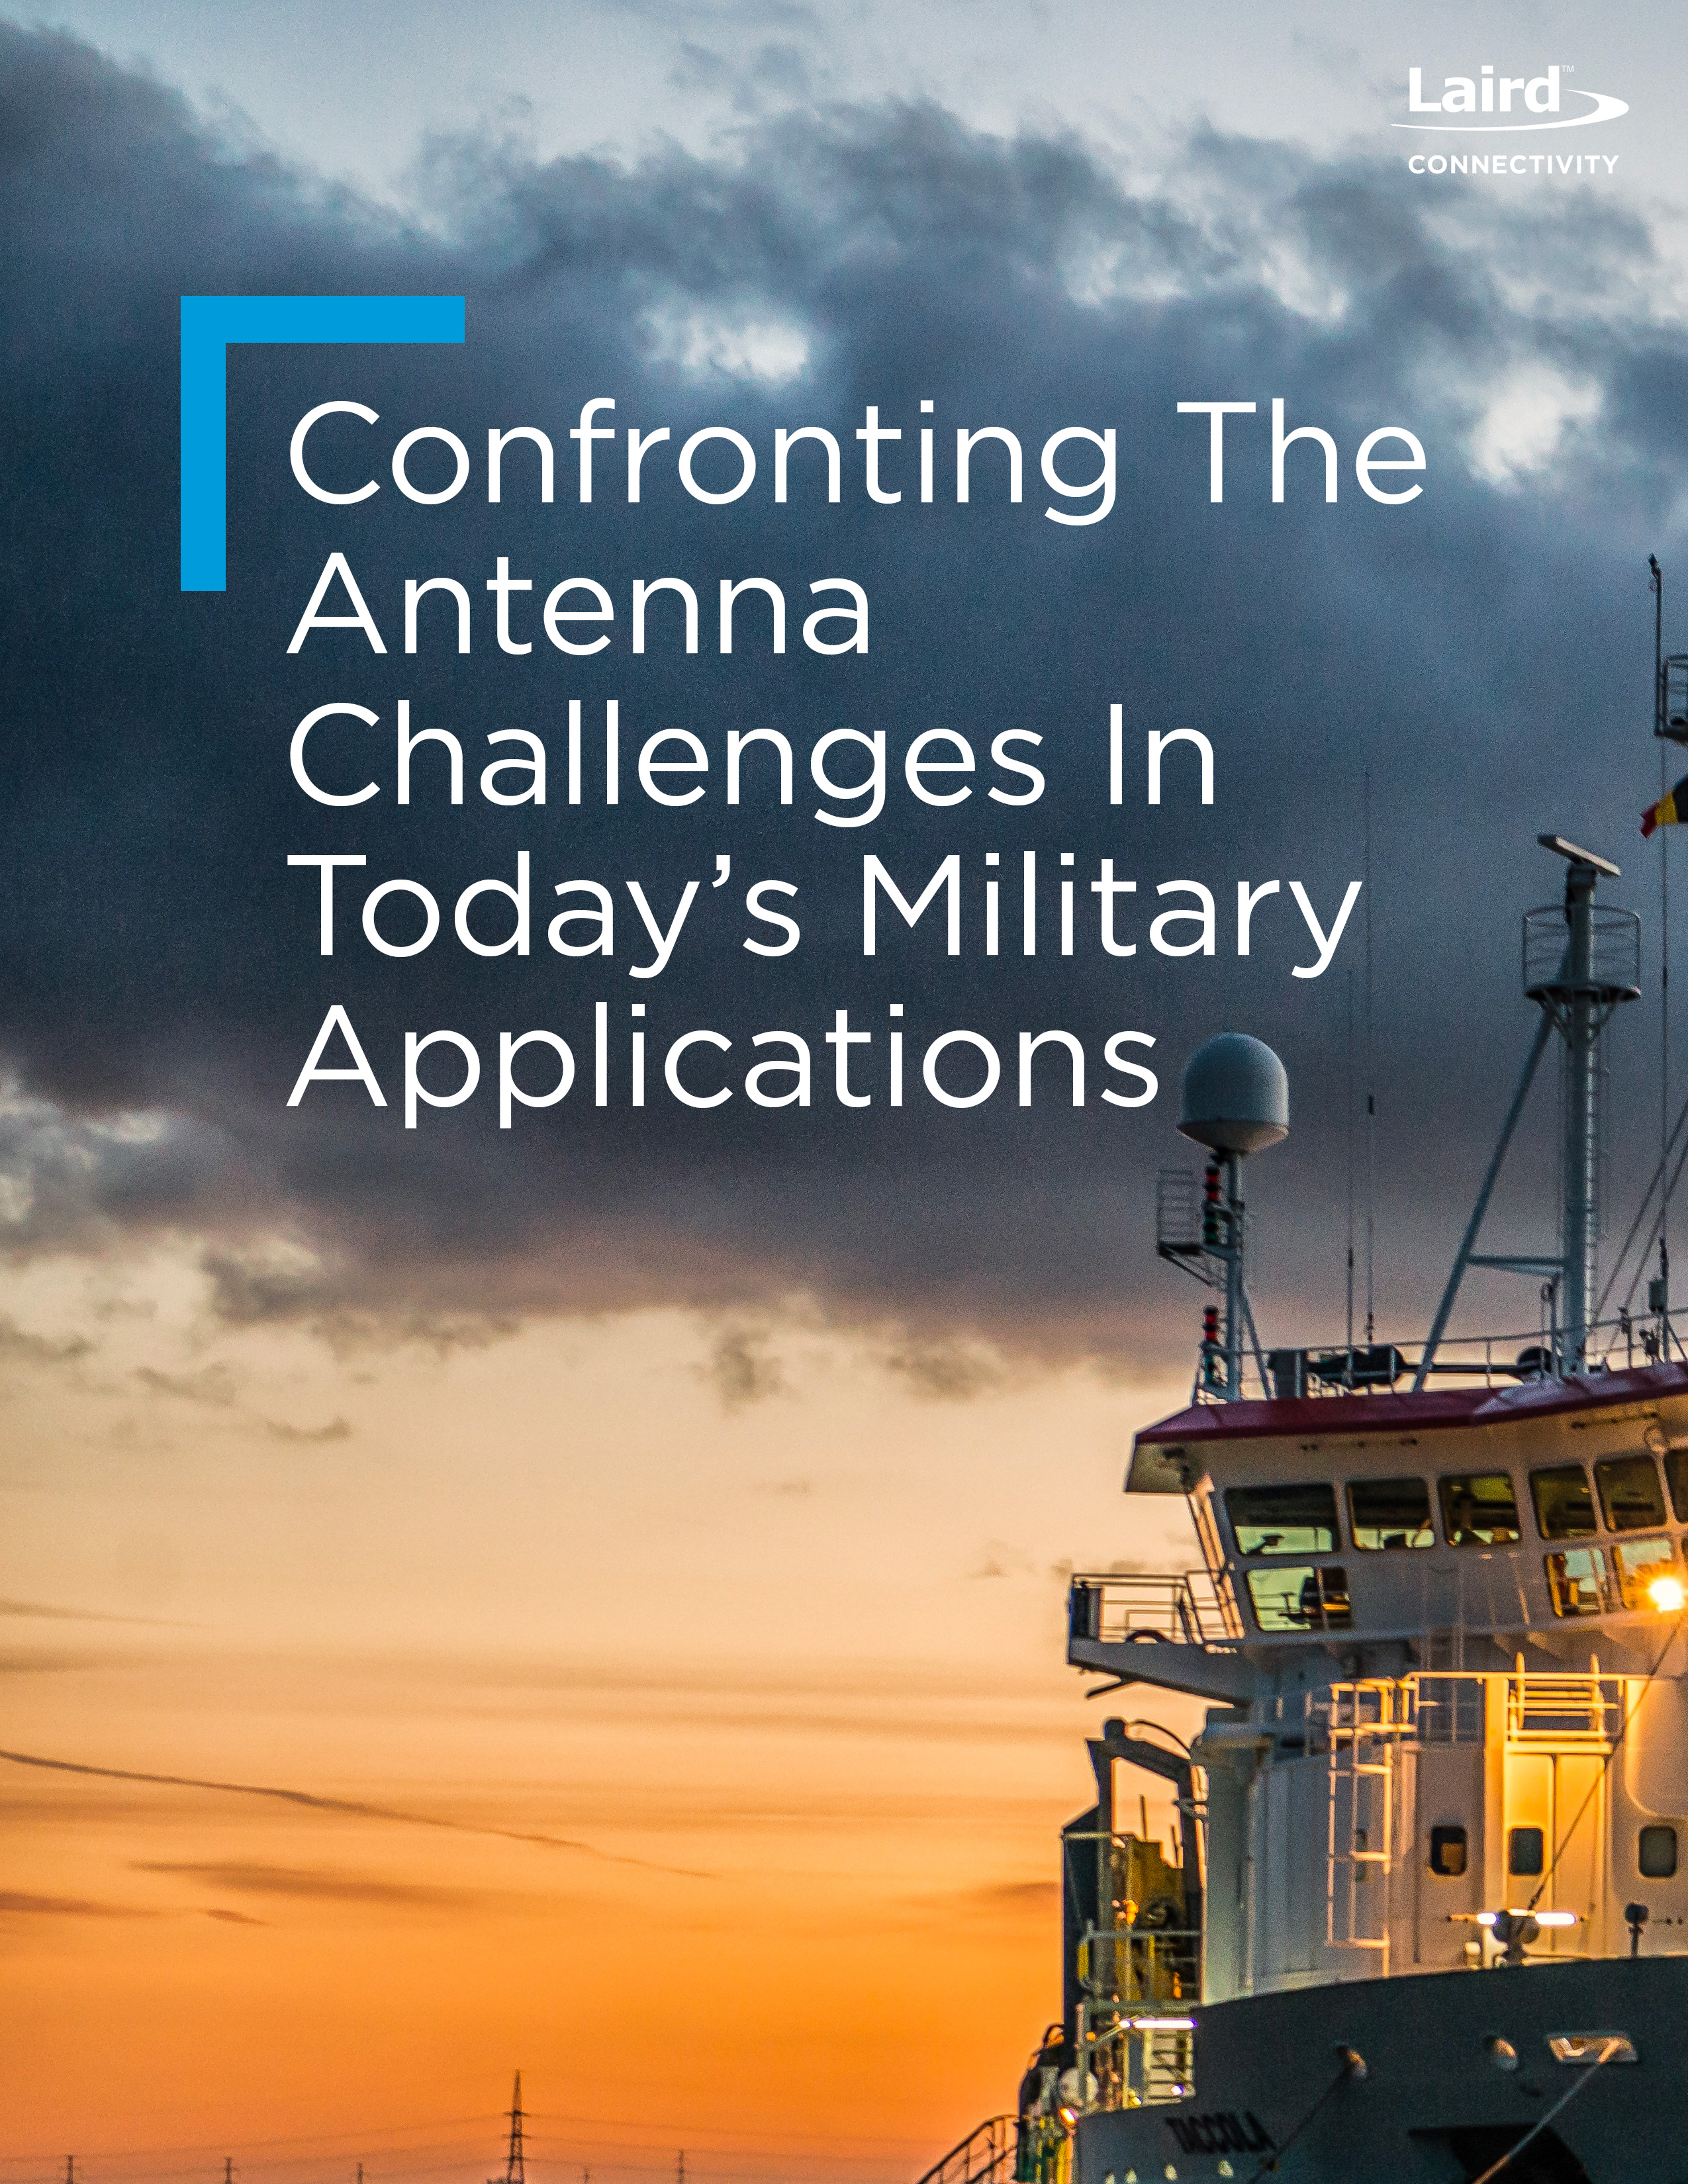 Confronting The Antenna Challenges In Today’s Military Applications